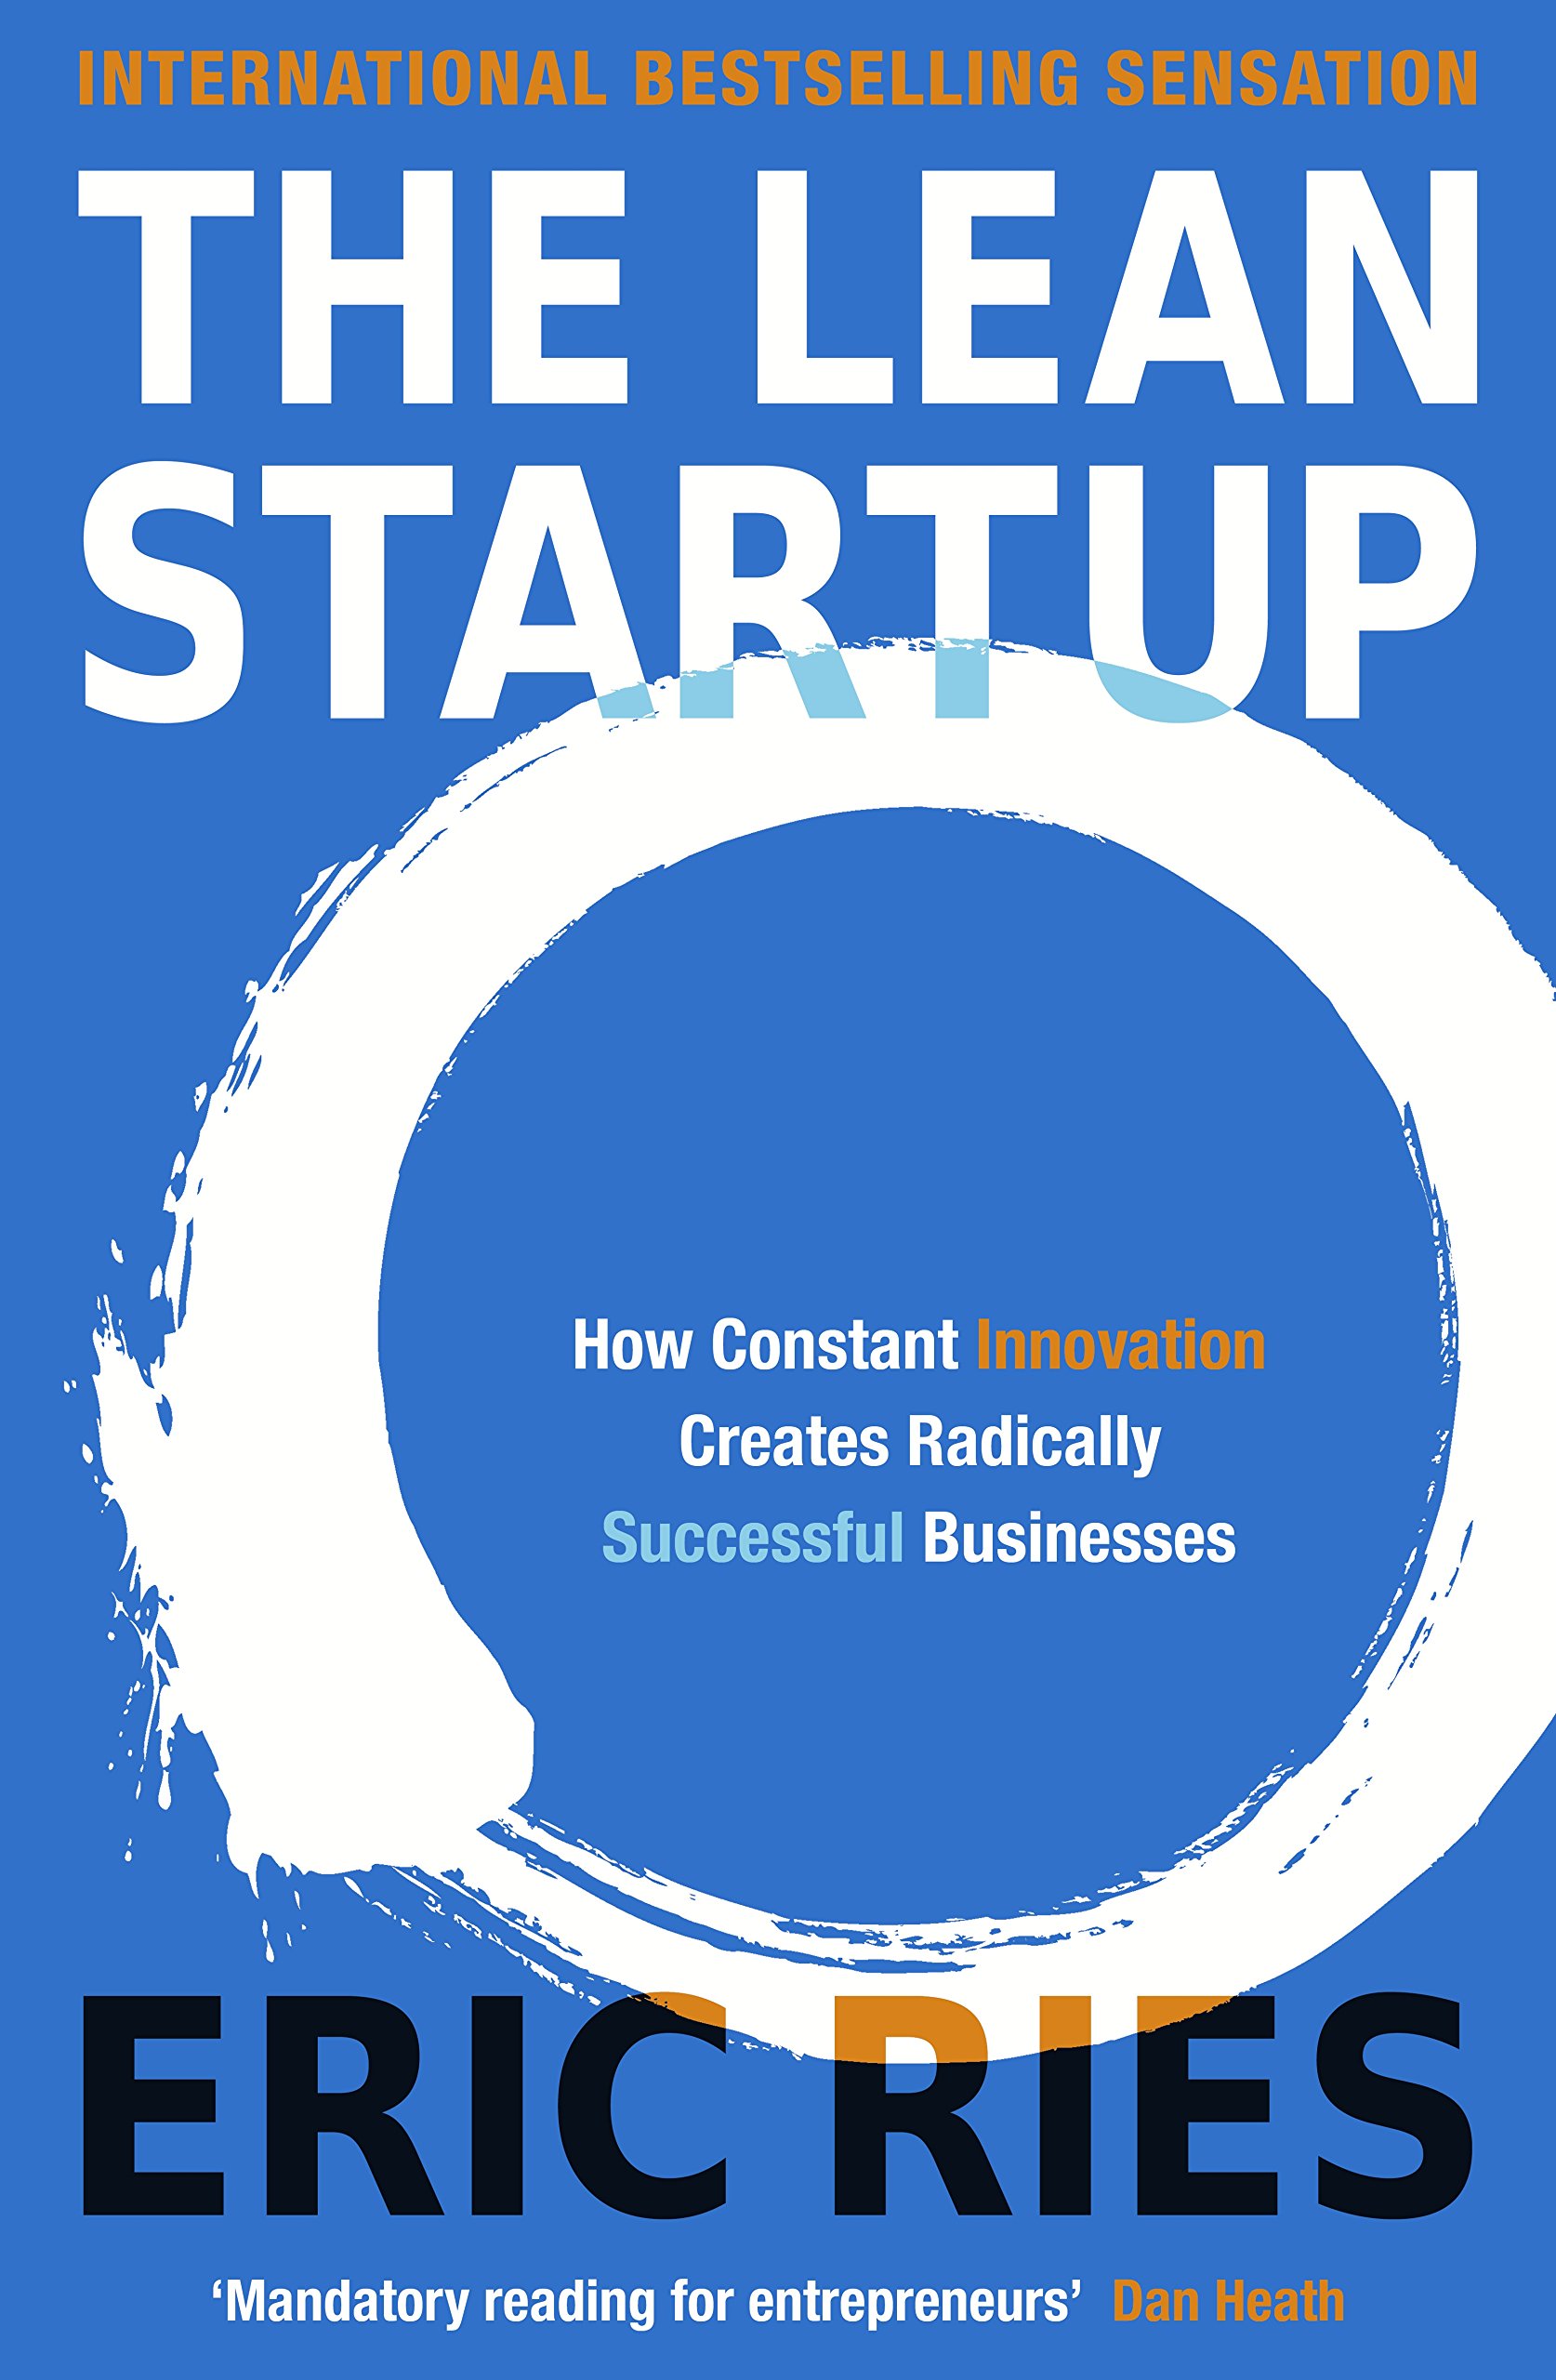 THE LEAN STARTUP How Constant Innovation Creates Radically Successful Businesses